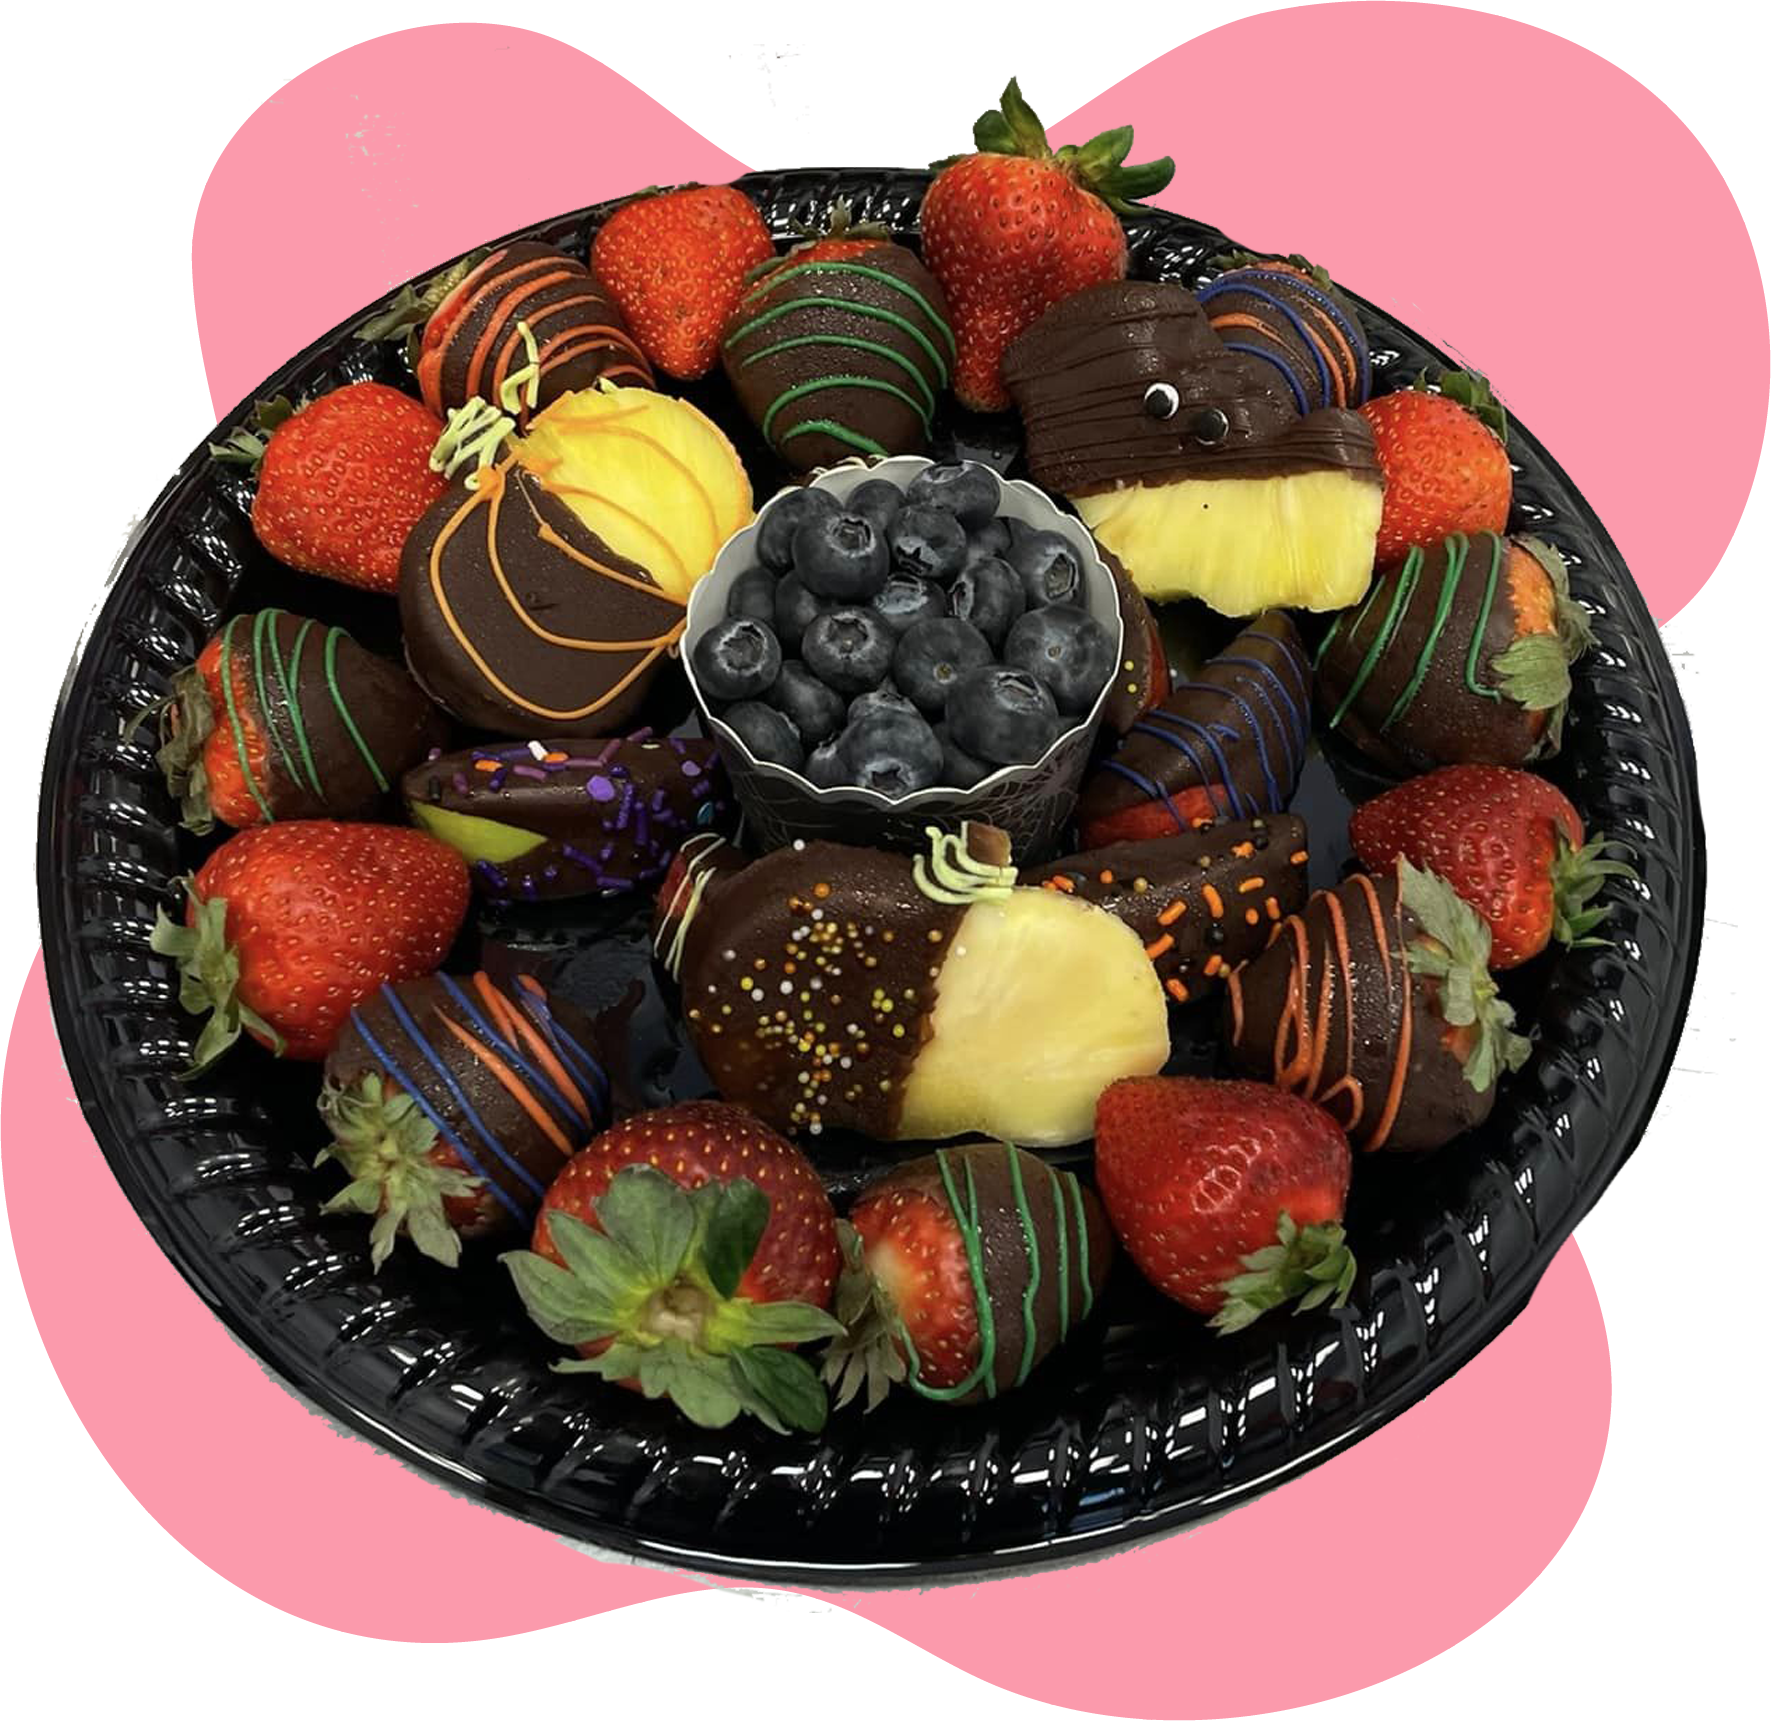 A black plate topped with chocolate covered strawberries and blueberries